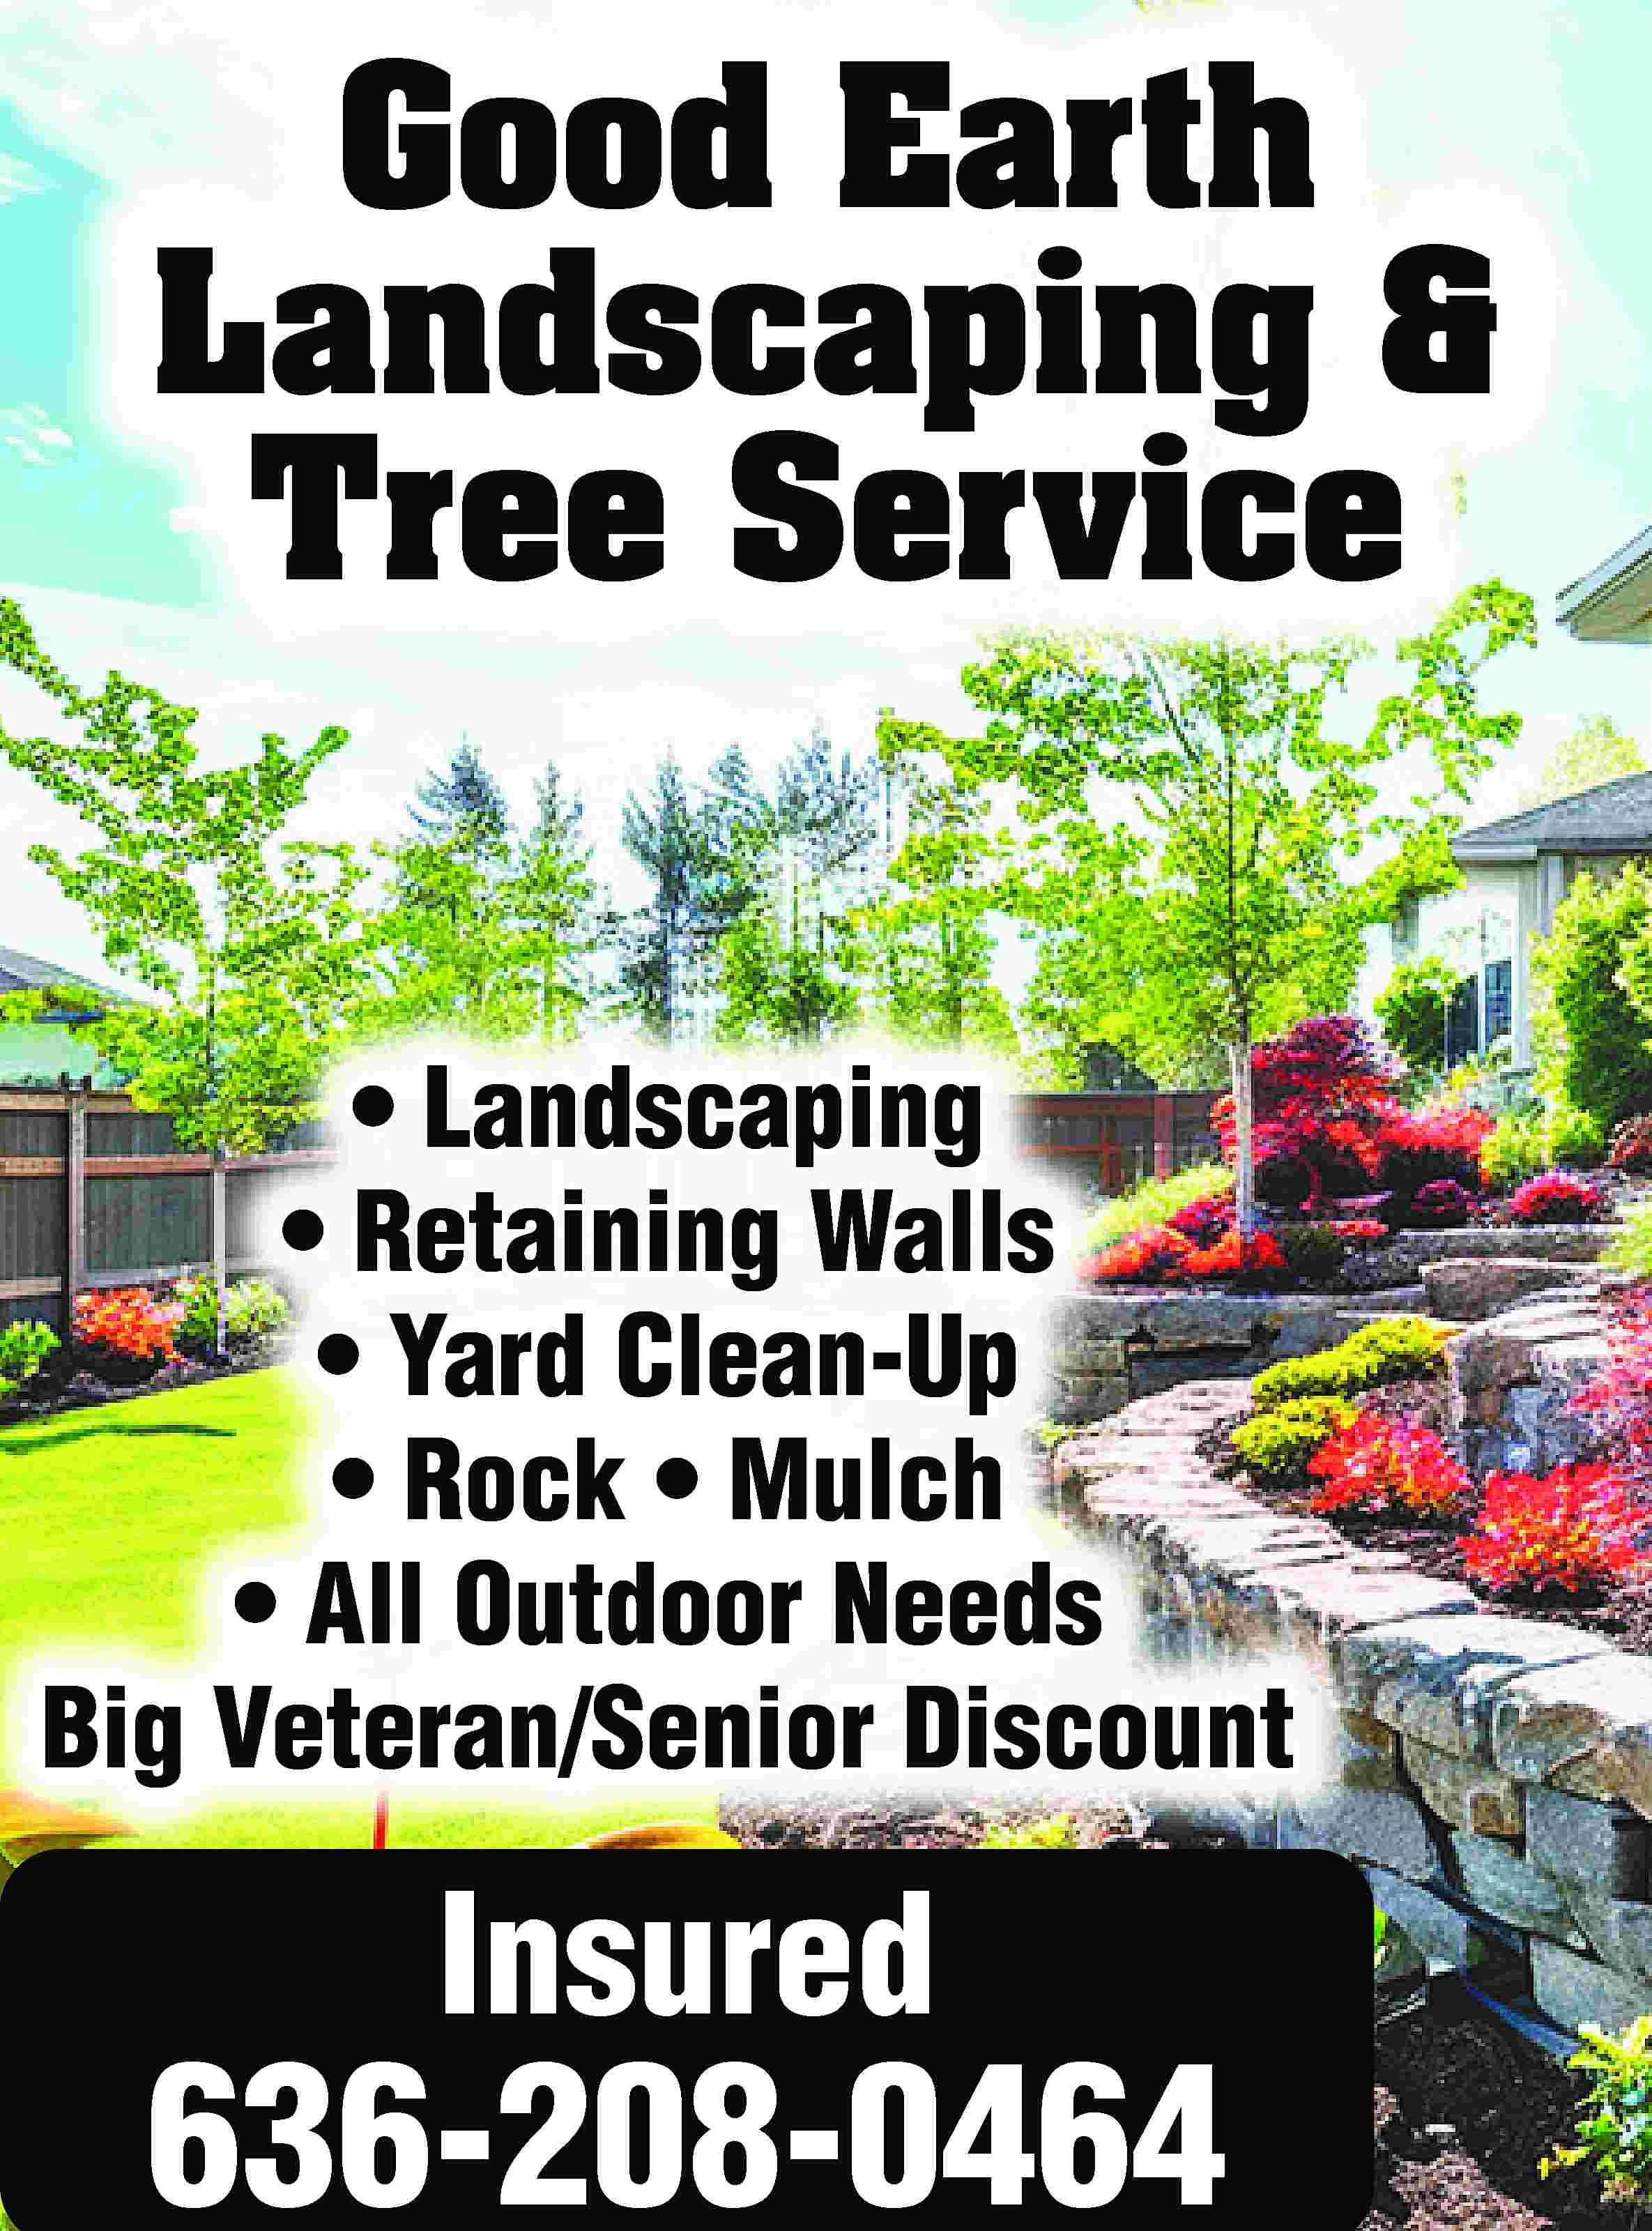 Good Earth Landscaping & Tree  Good Earth Landscaping & Tree Service • Landscaping • Retaining Walls • Yard Clean-Up • Rock • Mulch • All Outdoor Needs Big Veteran/Senior Discount Insured 636-208-0464